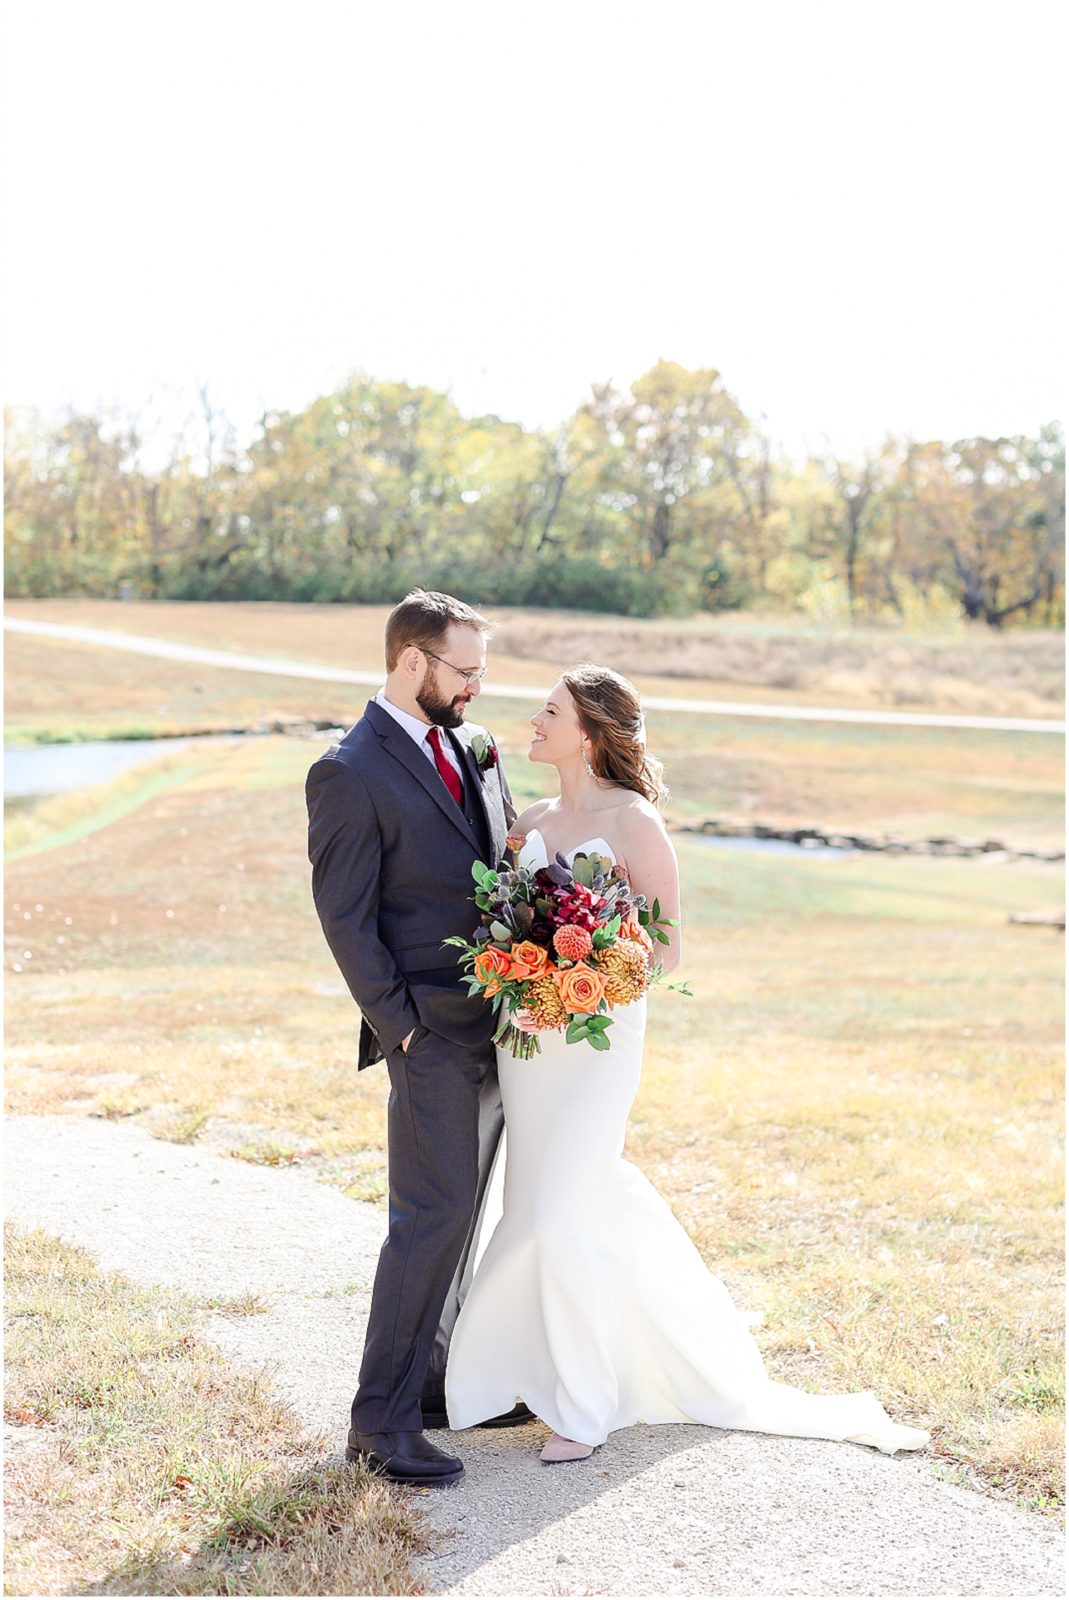 Lux Fall Floral Wedding Photography at Eagles Landing at Lake Olathe | Wedding Photographer Mariam Saifan Photography | Fall Wedding Theme | Different Color Bridesmaids Dresses | Flat Lays | Pretty Details | Photography Education | Wild Hill Flowers | Good Earth Floral | Kansas City Wedding Planners